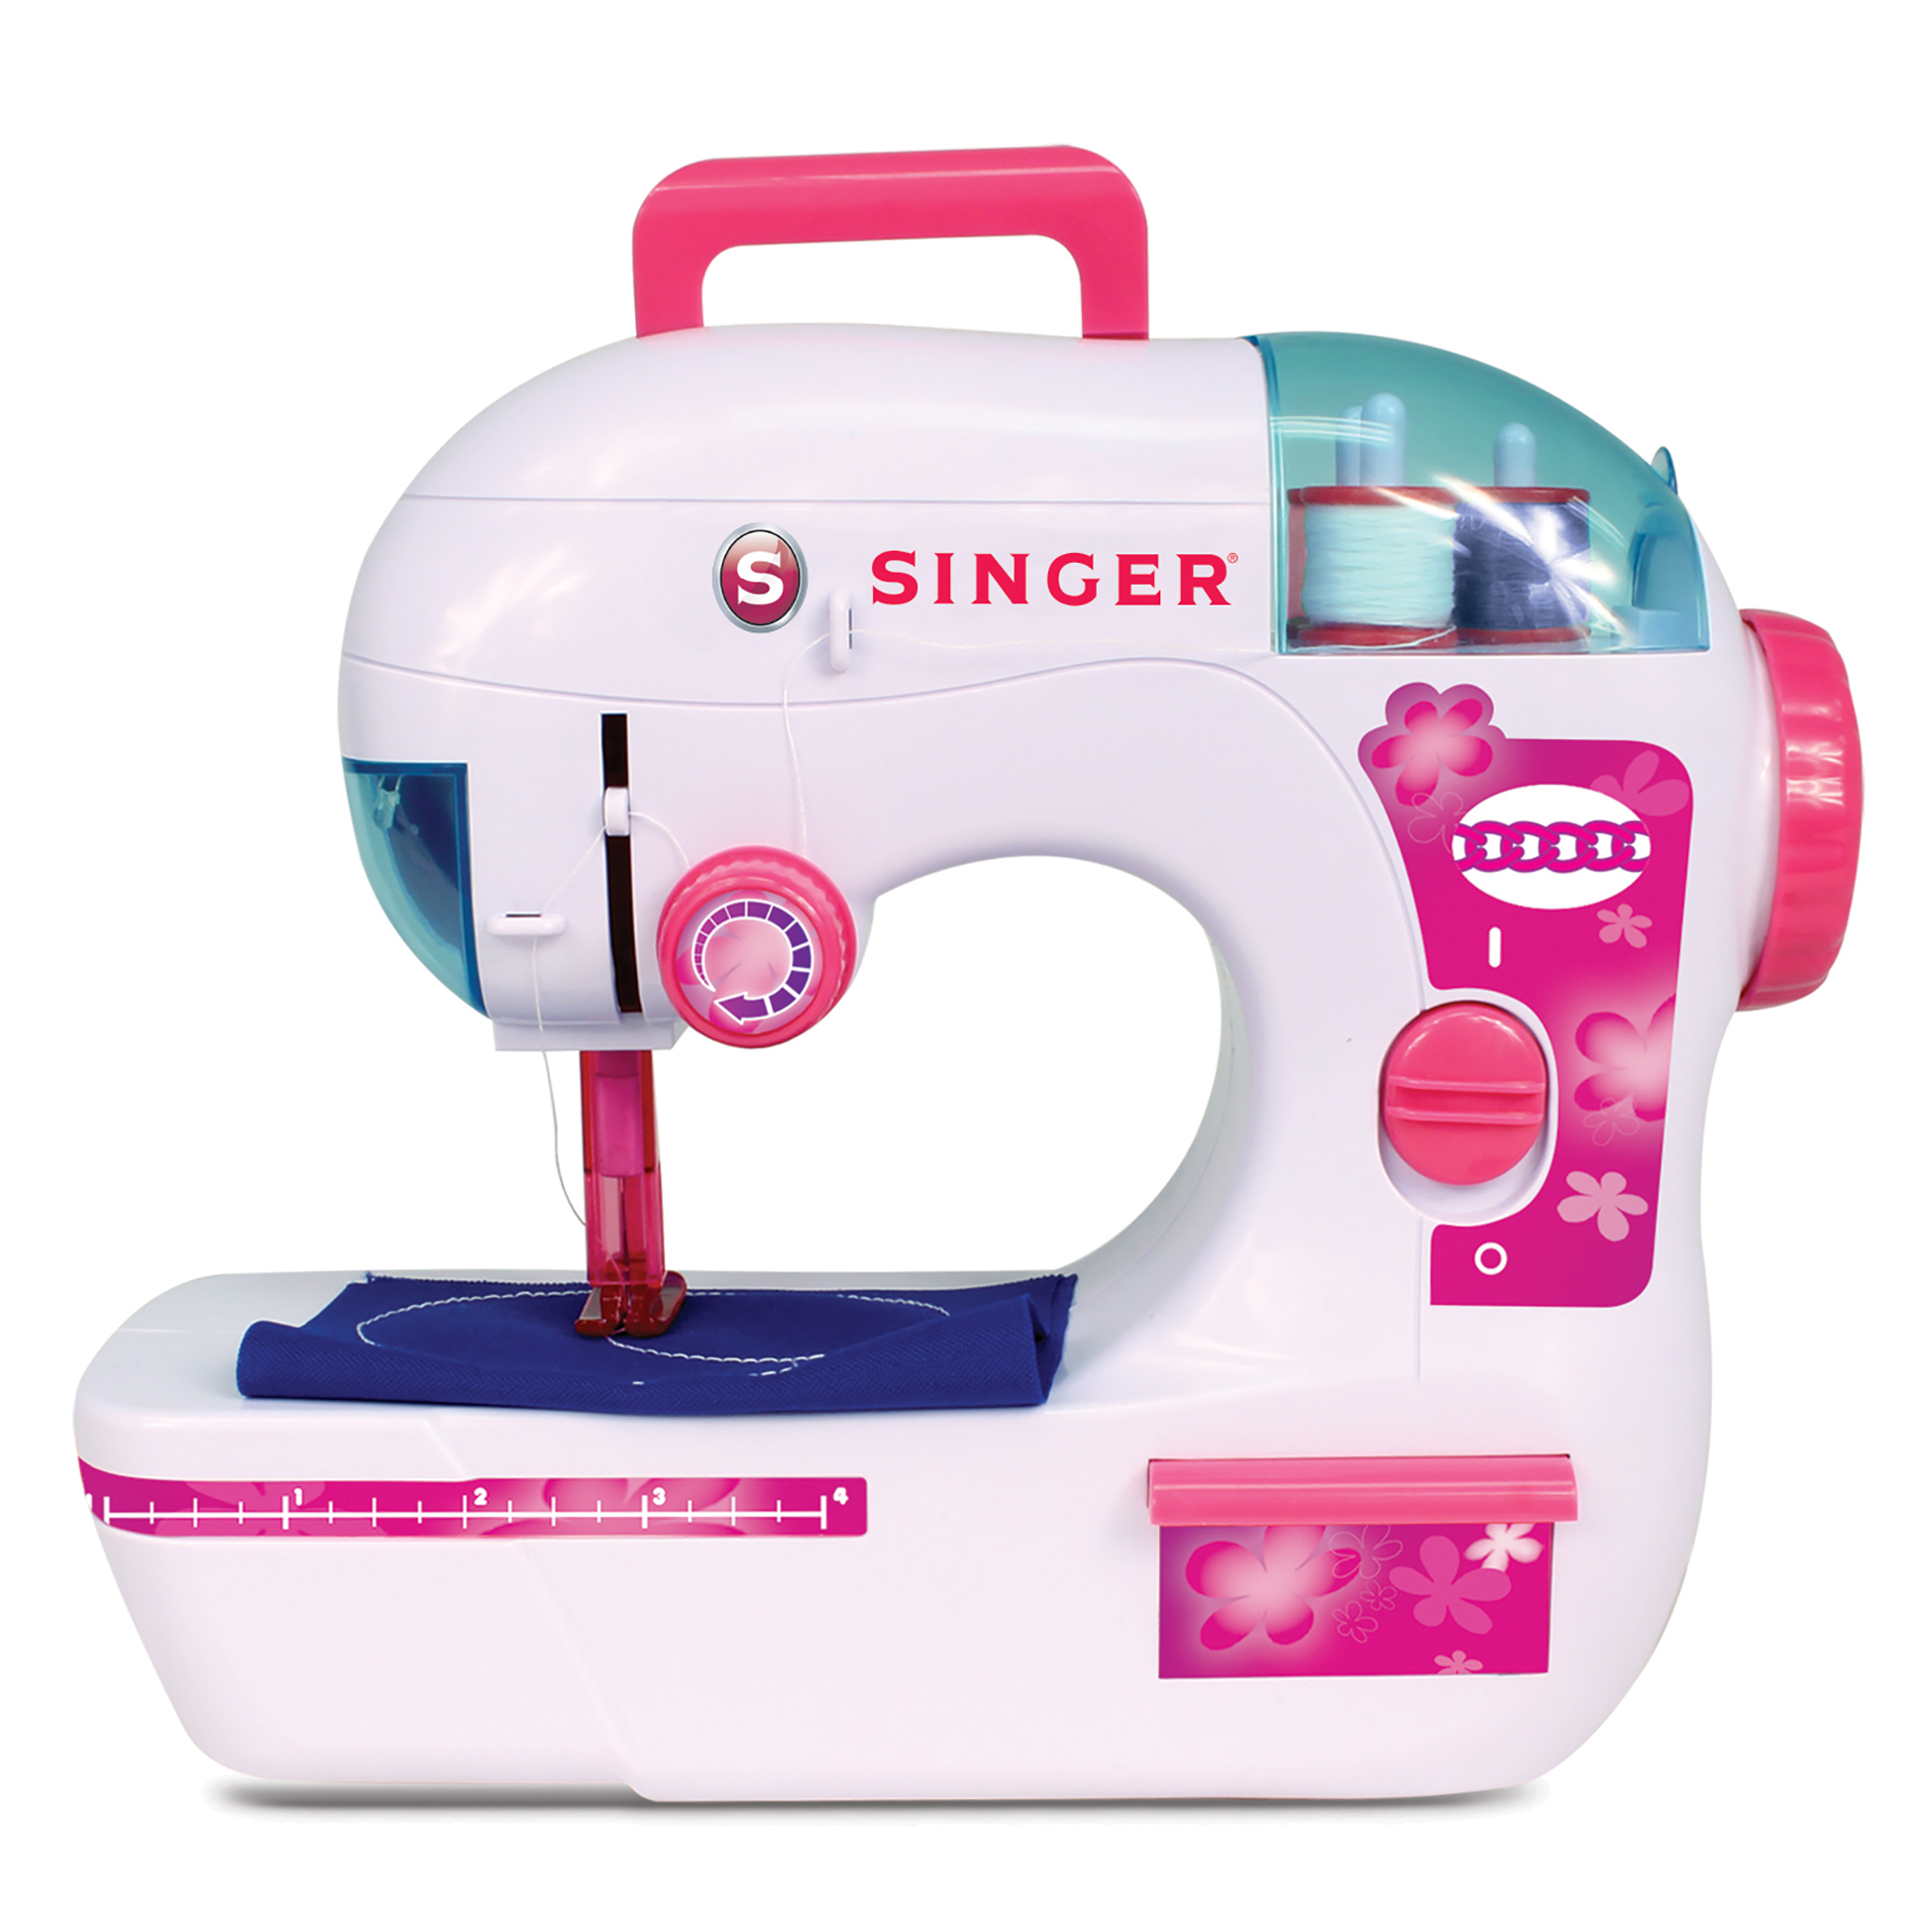 Singer Elegant Chainstitch Sewing Machine with Foot Pedal - image 1 of 3